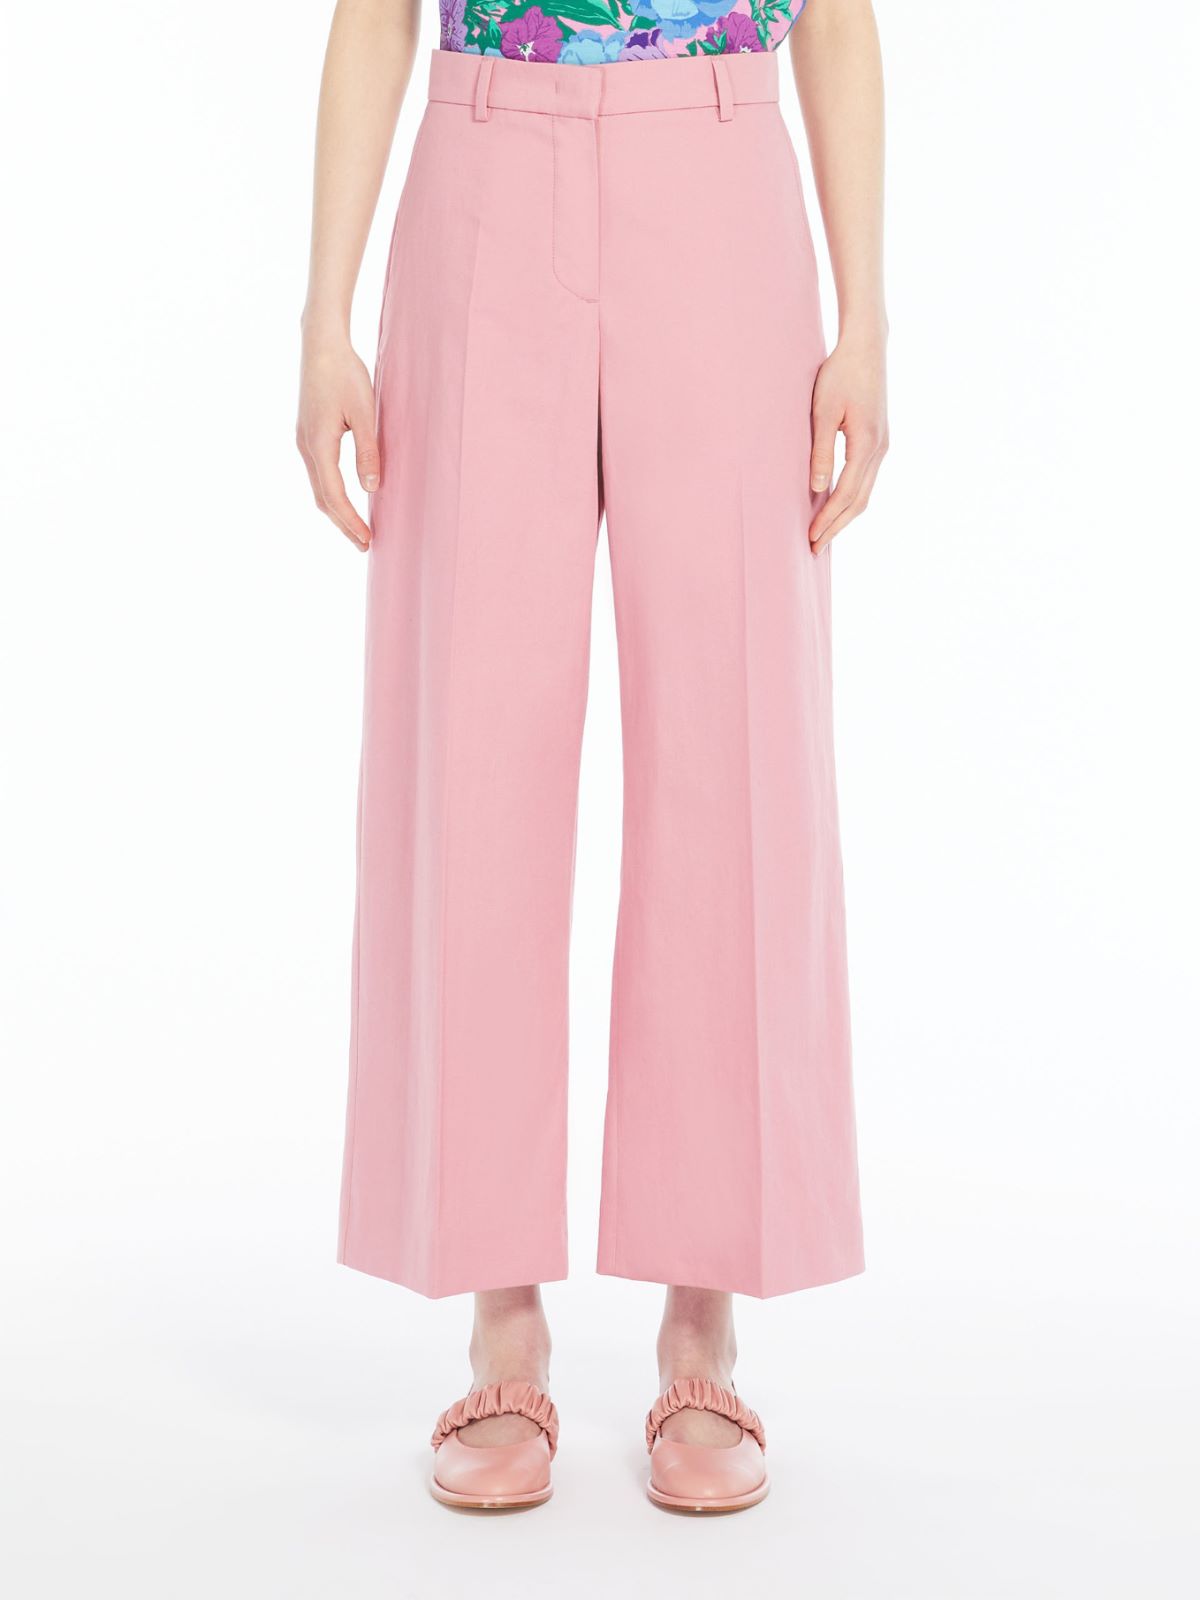 Cotton and linen trousers - PINK - Weekend Max Mara - 2